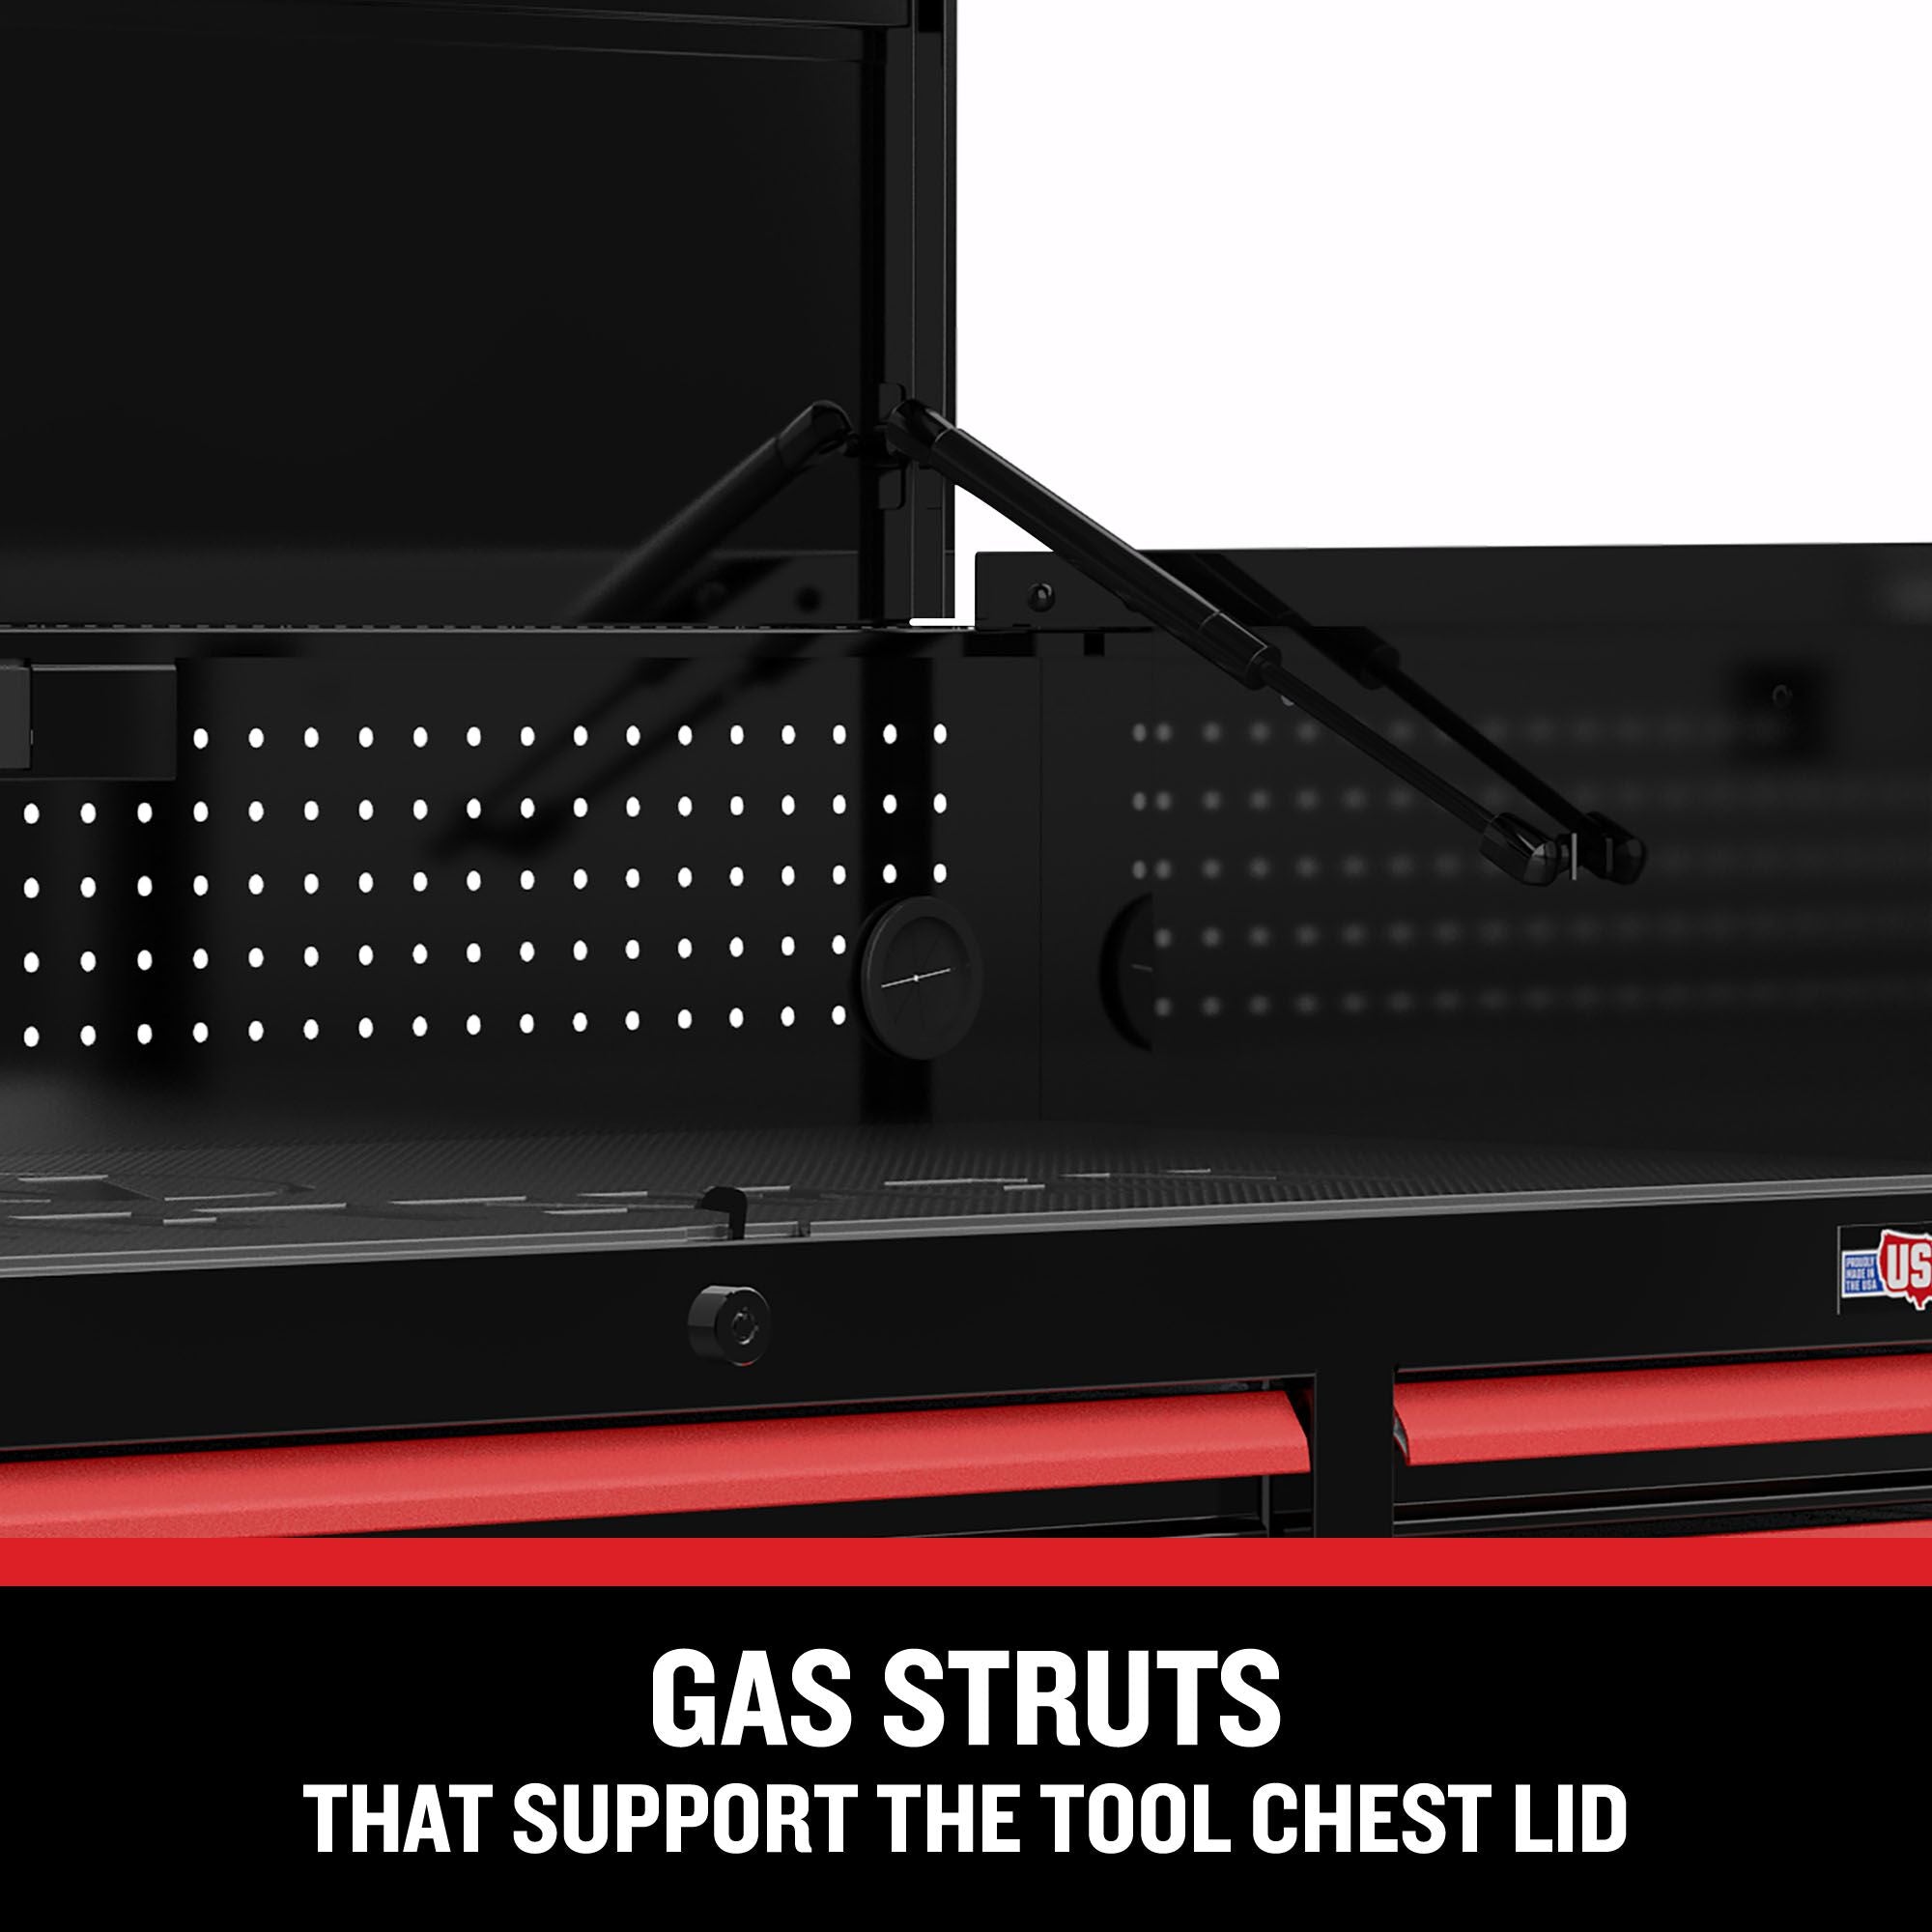 CRAFTSMAN V-Series 52-inch chest with gas struts feature call out